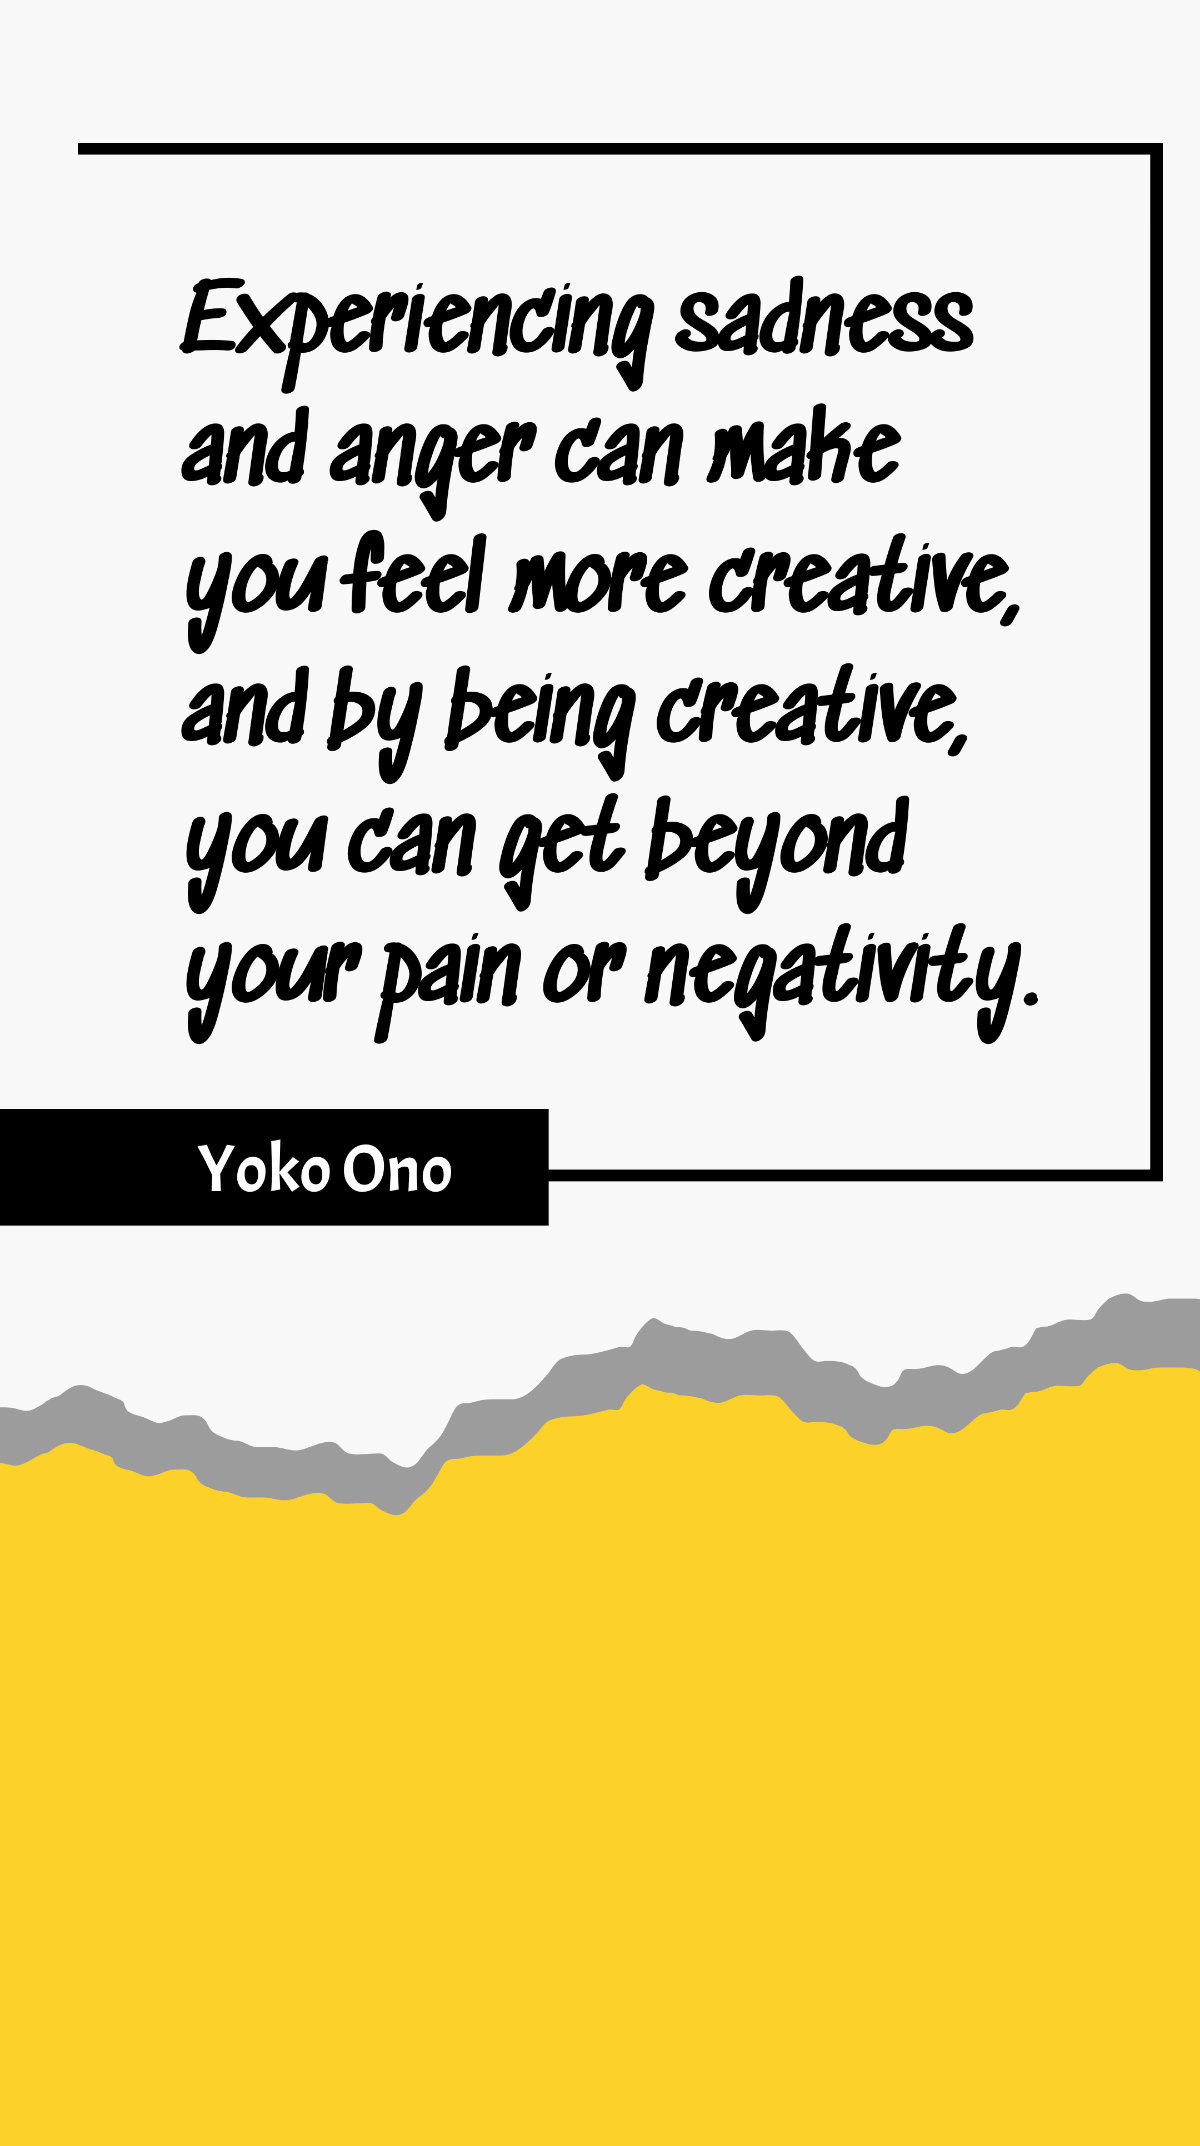 Yoko Ono - Experiencing sadness and anger can make you feel more creative, and by being creative, you can get beyond your pain or negativity. Template